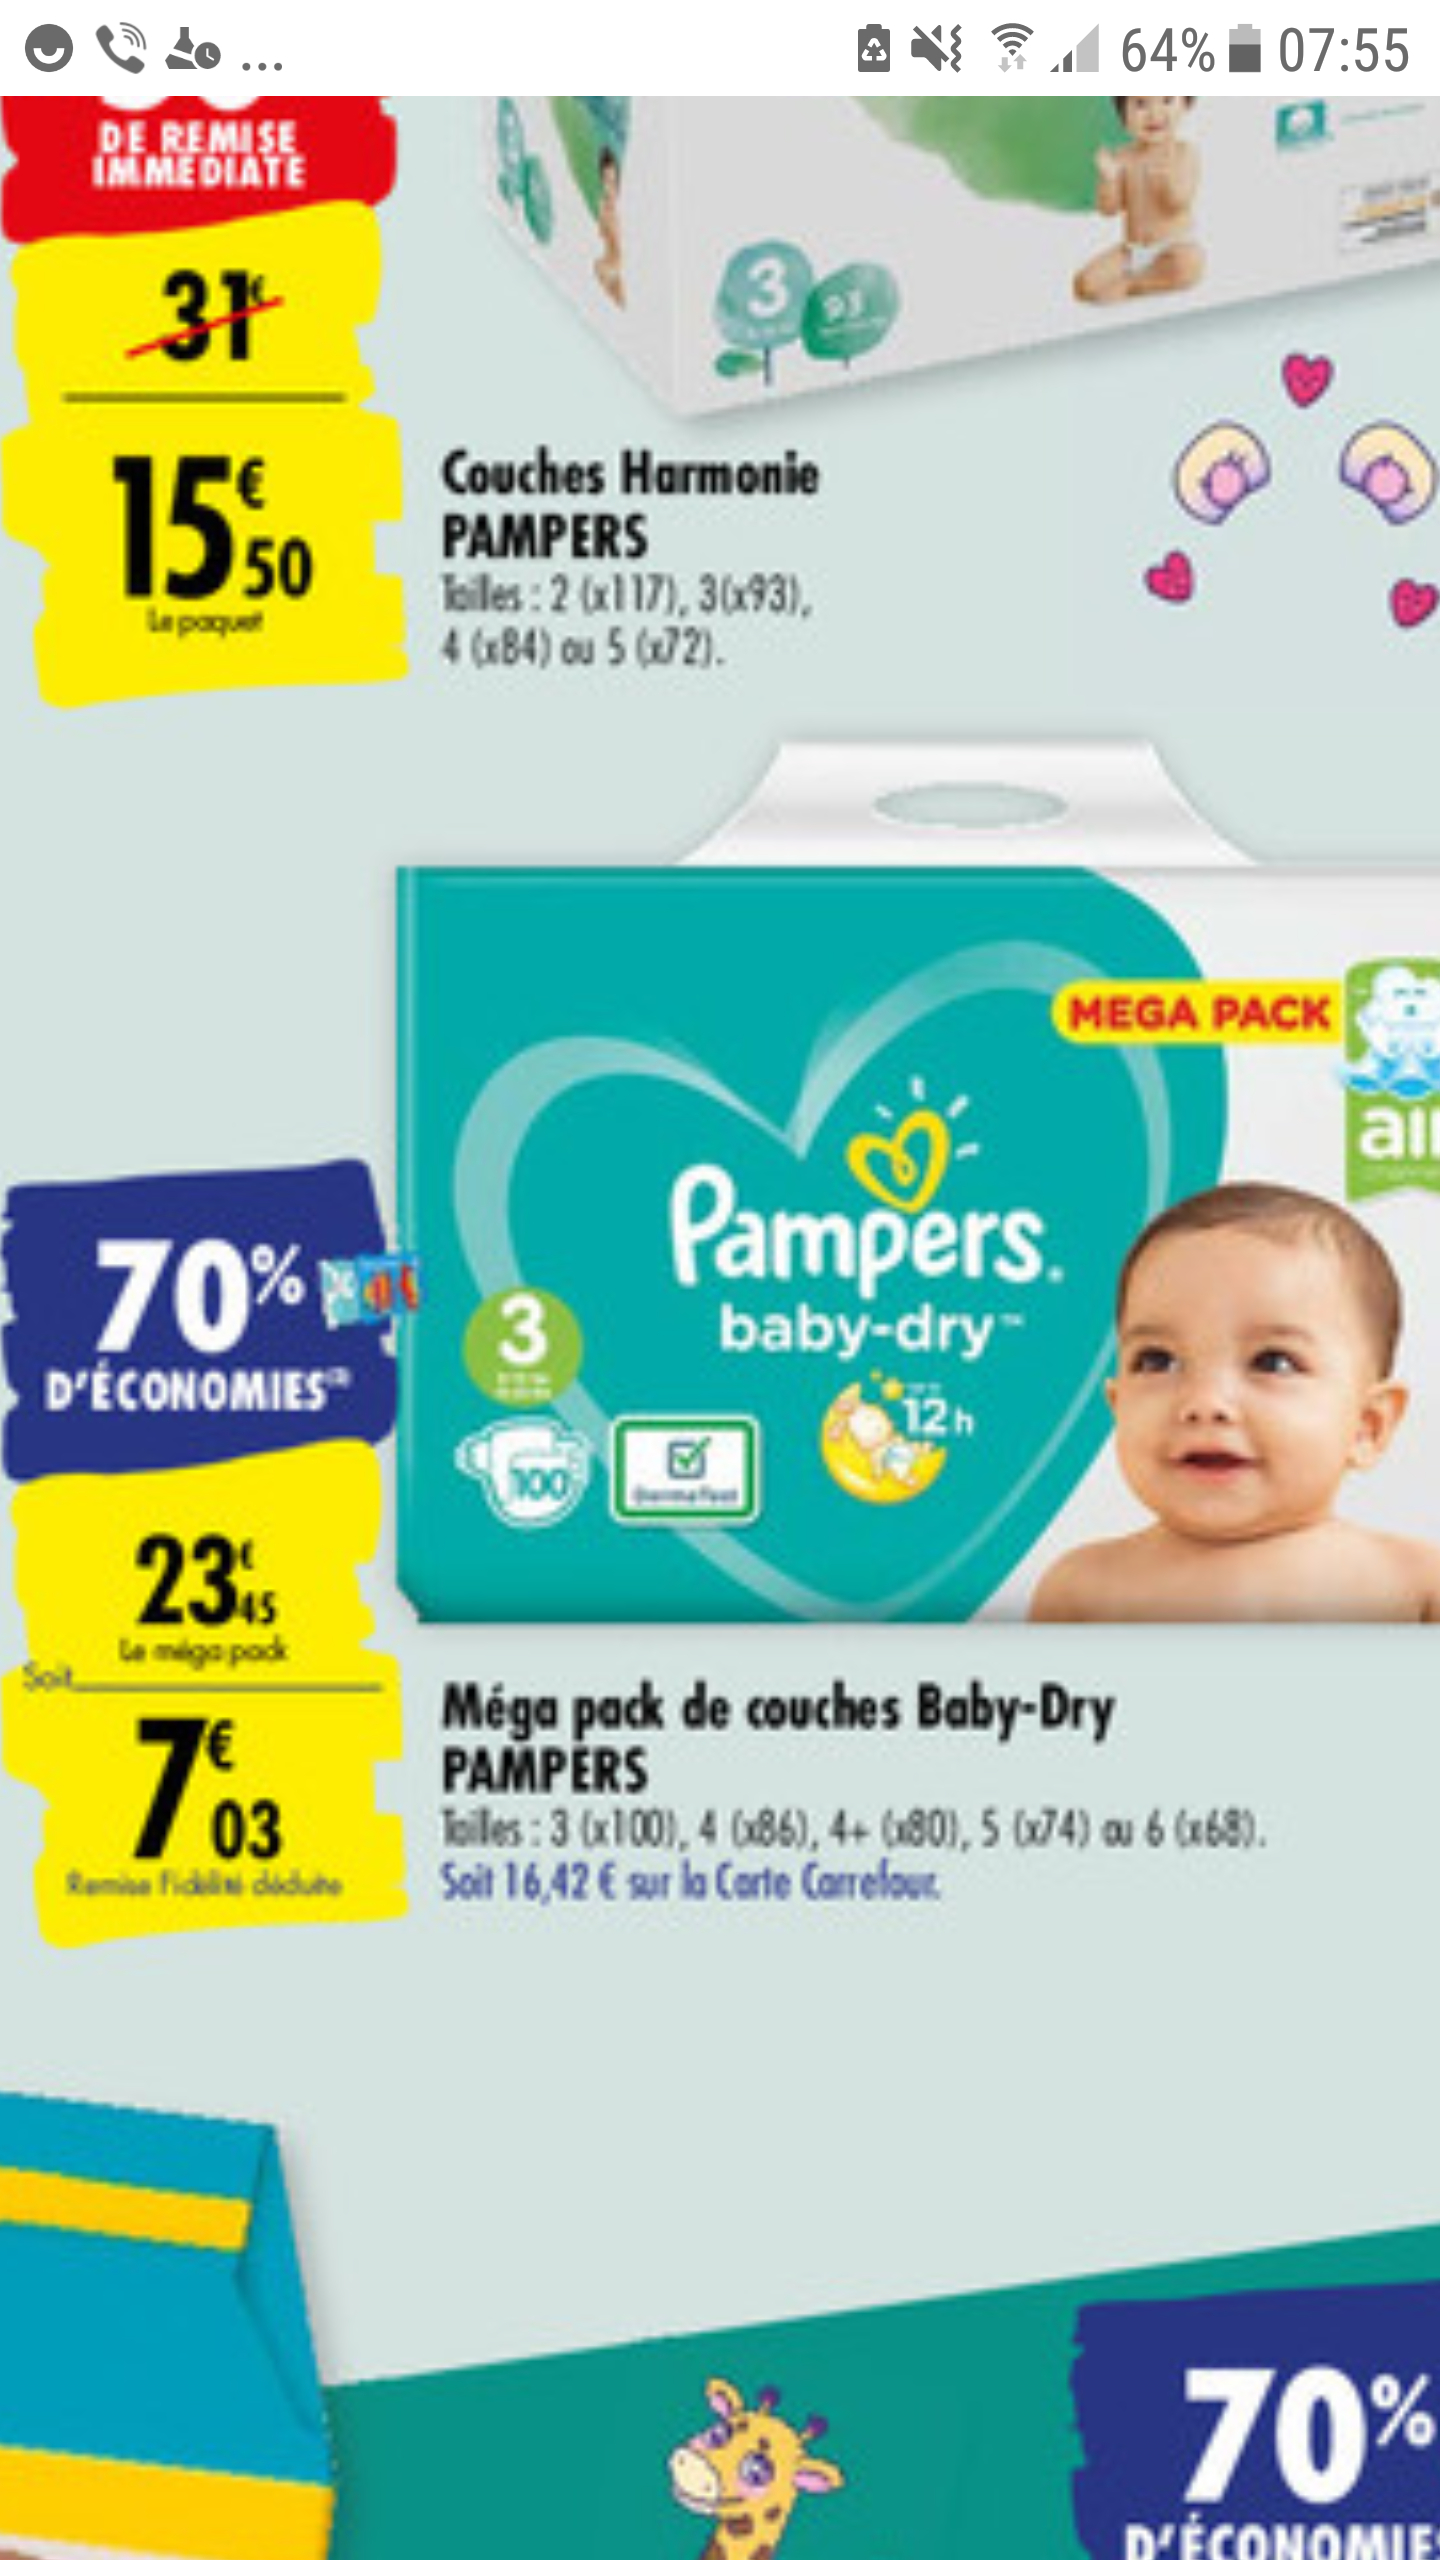 carrefour couche pampers